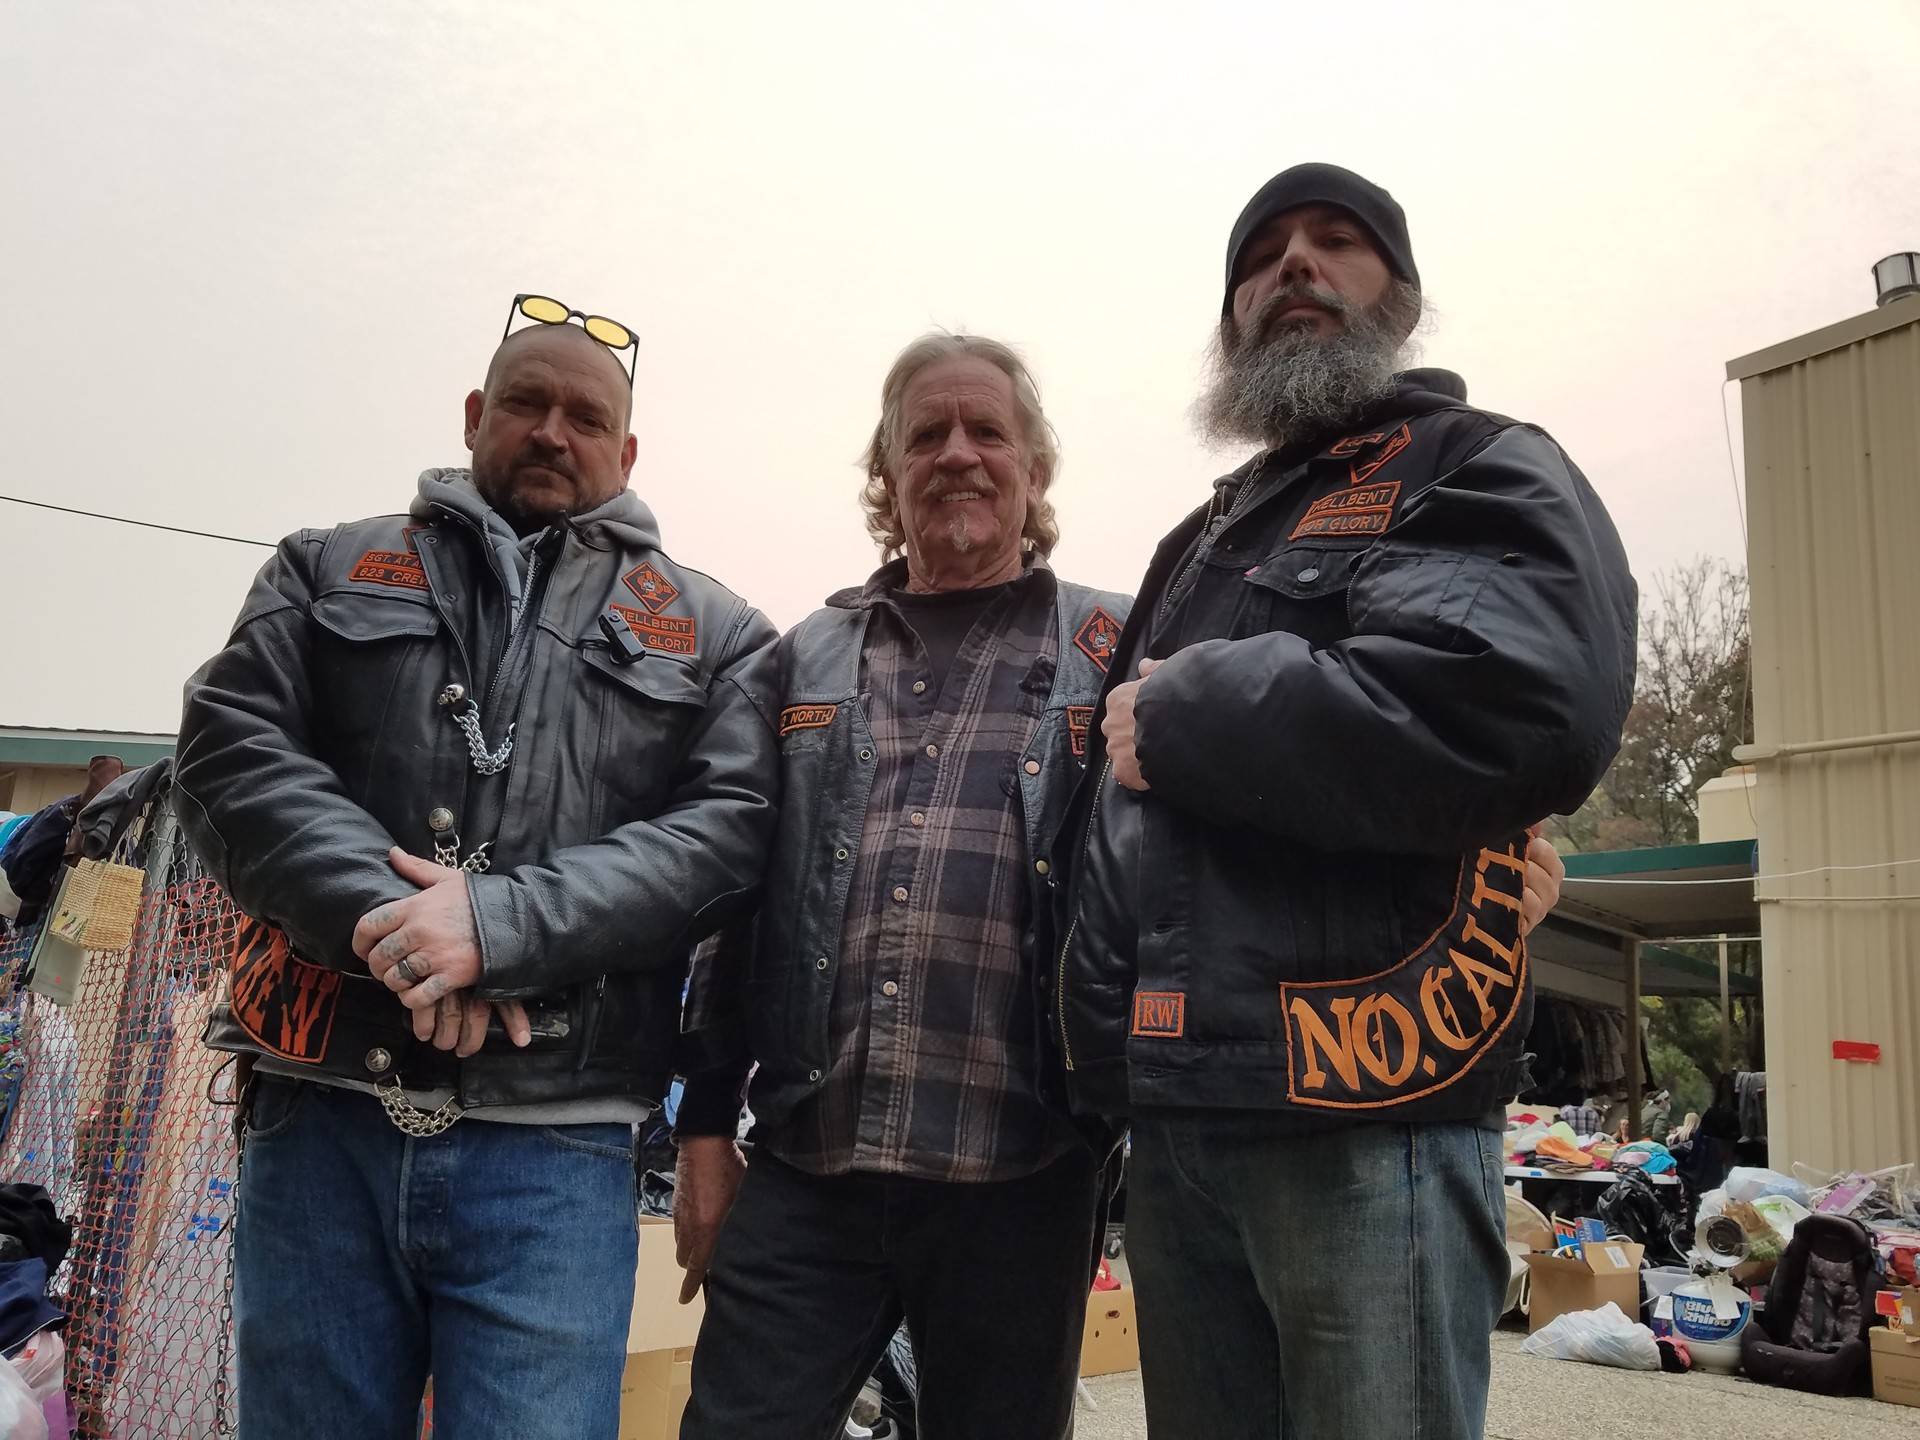 Members of the Hellbent Motorcycle Club 823 Chapter were handling security for a Camp Fire shelter at the East Avenue Church in Chico on Nov. 13. Alex Emslie/KQED